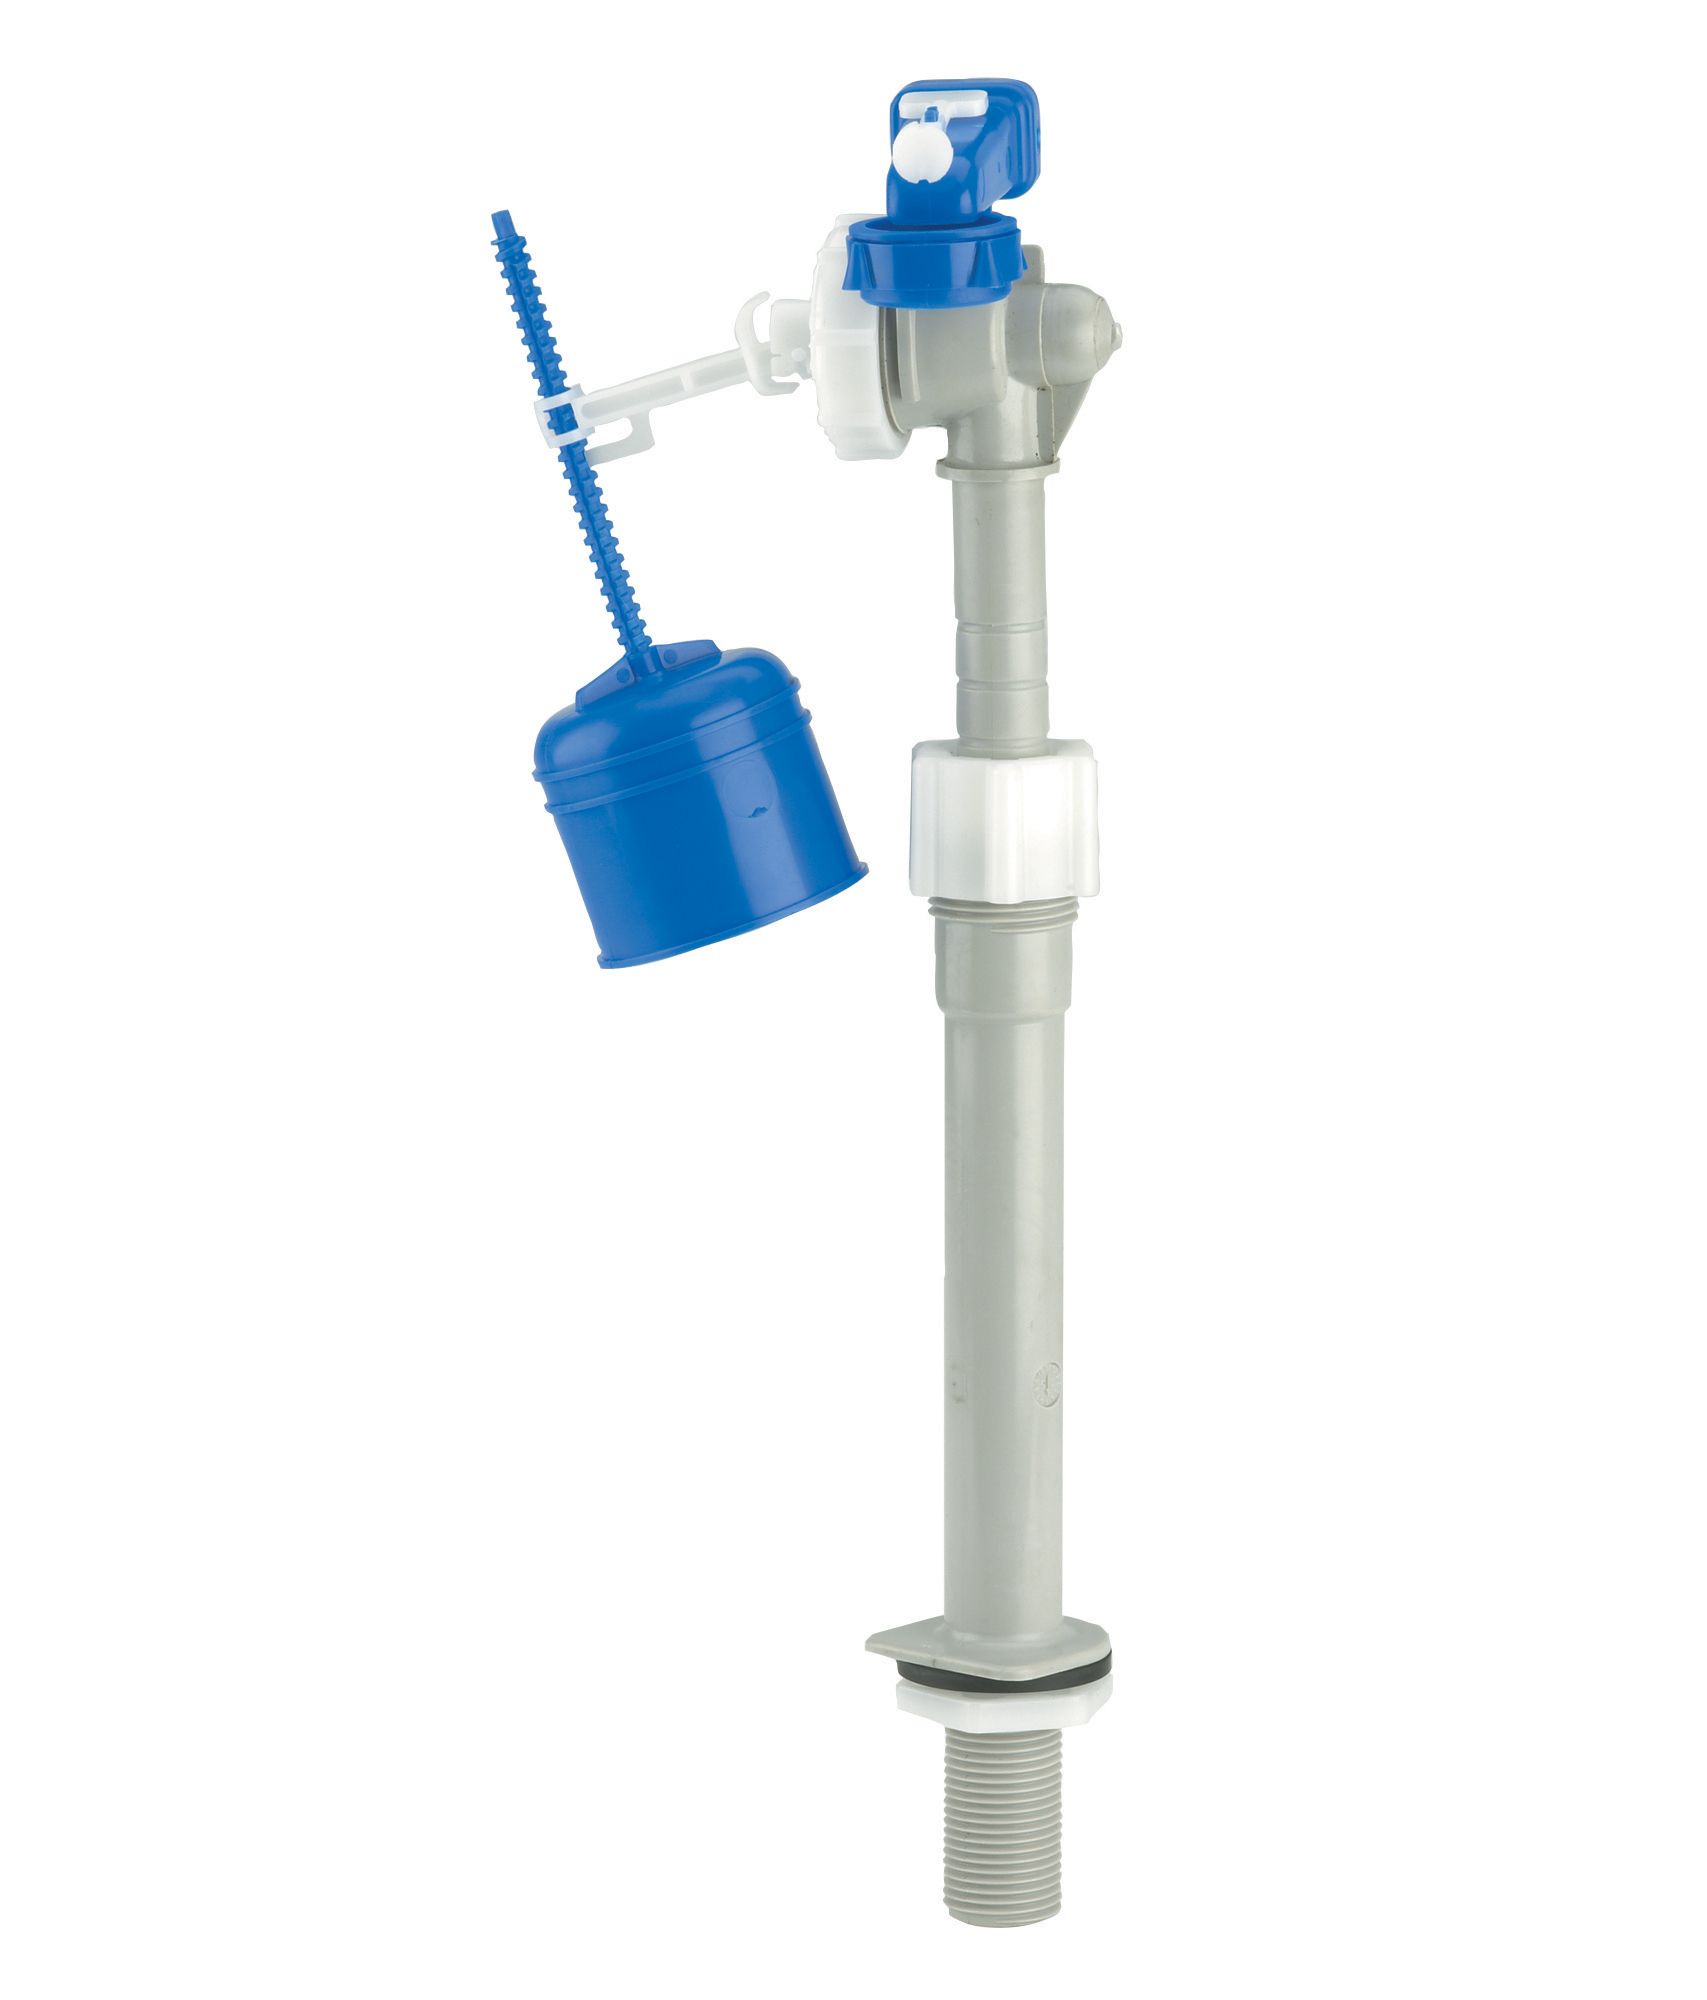 Image of Dudley Adjustable Inlet Valve with Standard Tail